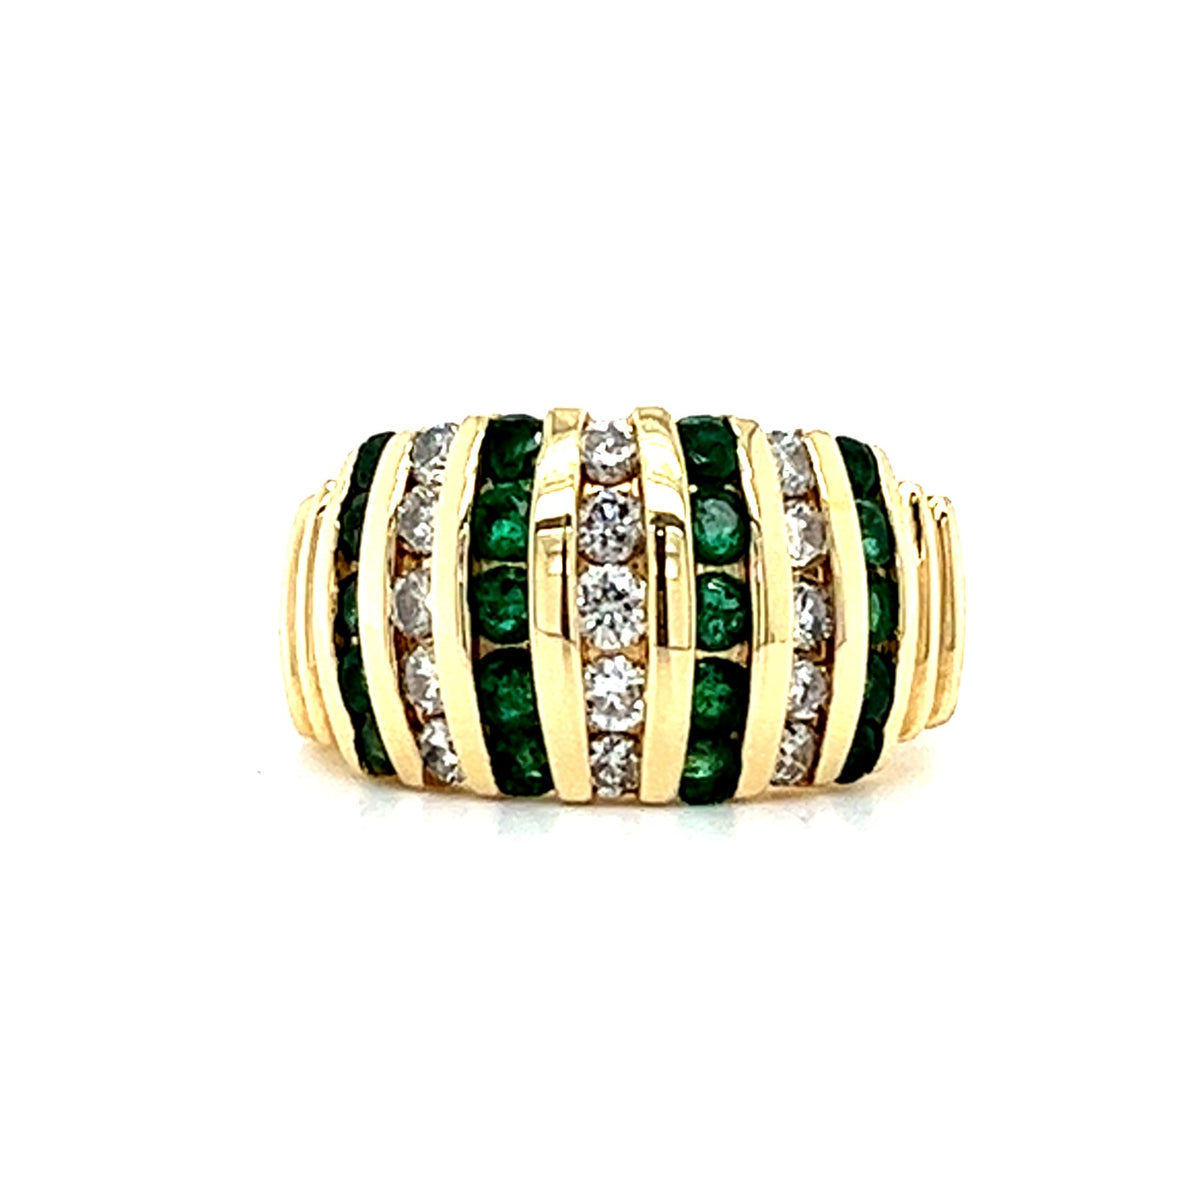 14KT YELLOW GOLD EMERALD AND DIAMOND LADIES RING